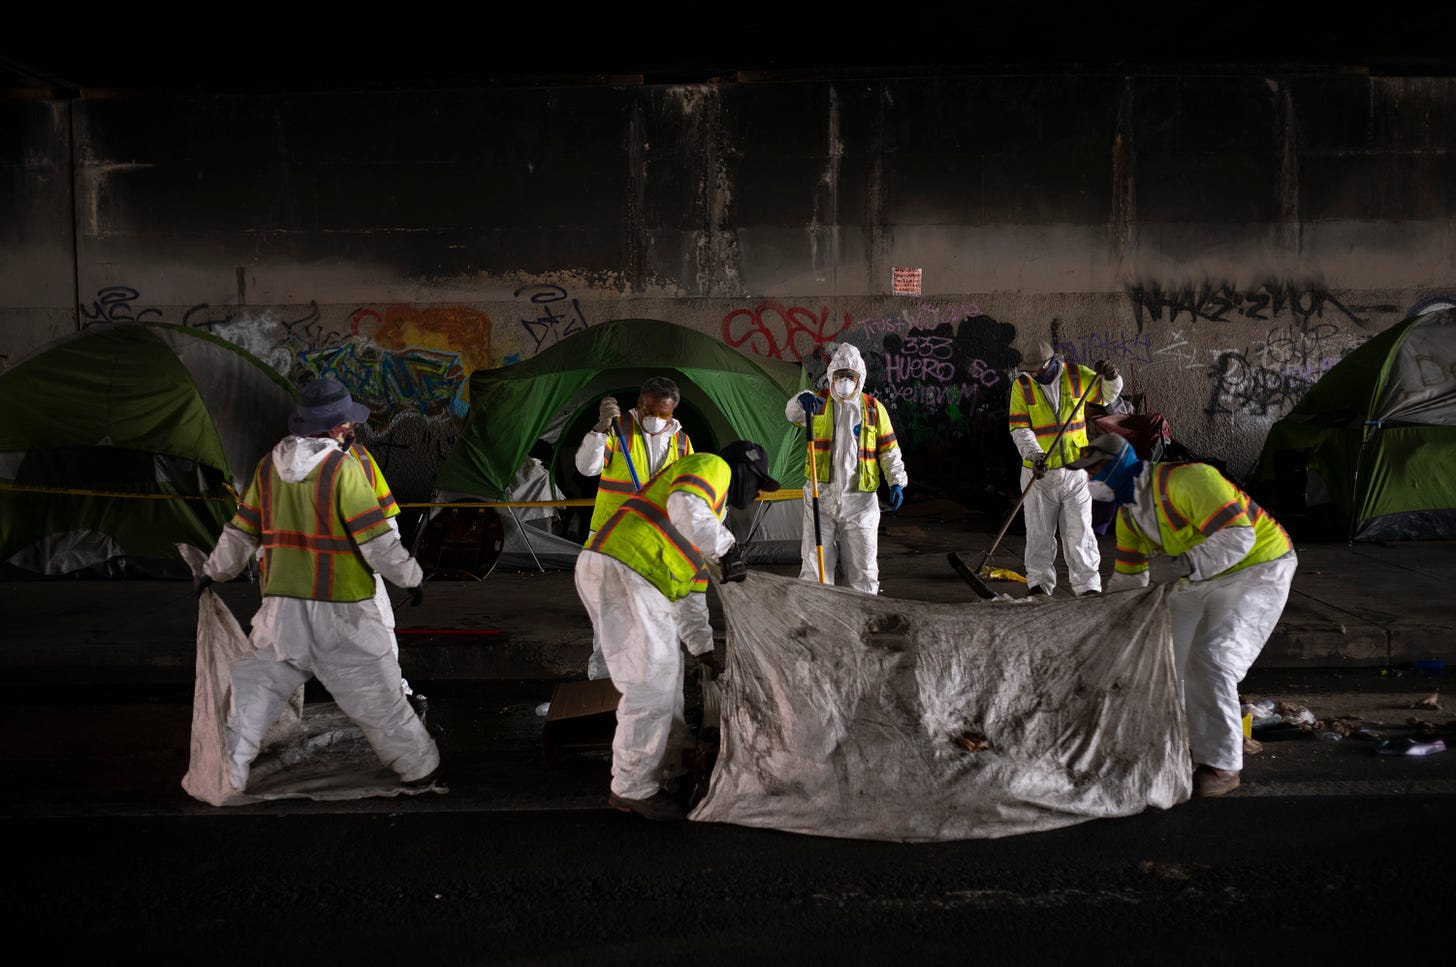 Los Angeles city employees clean up a homeless encampment to relocate homeless individuals into temporary housing.